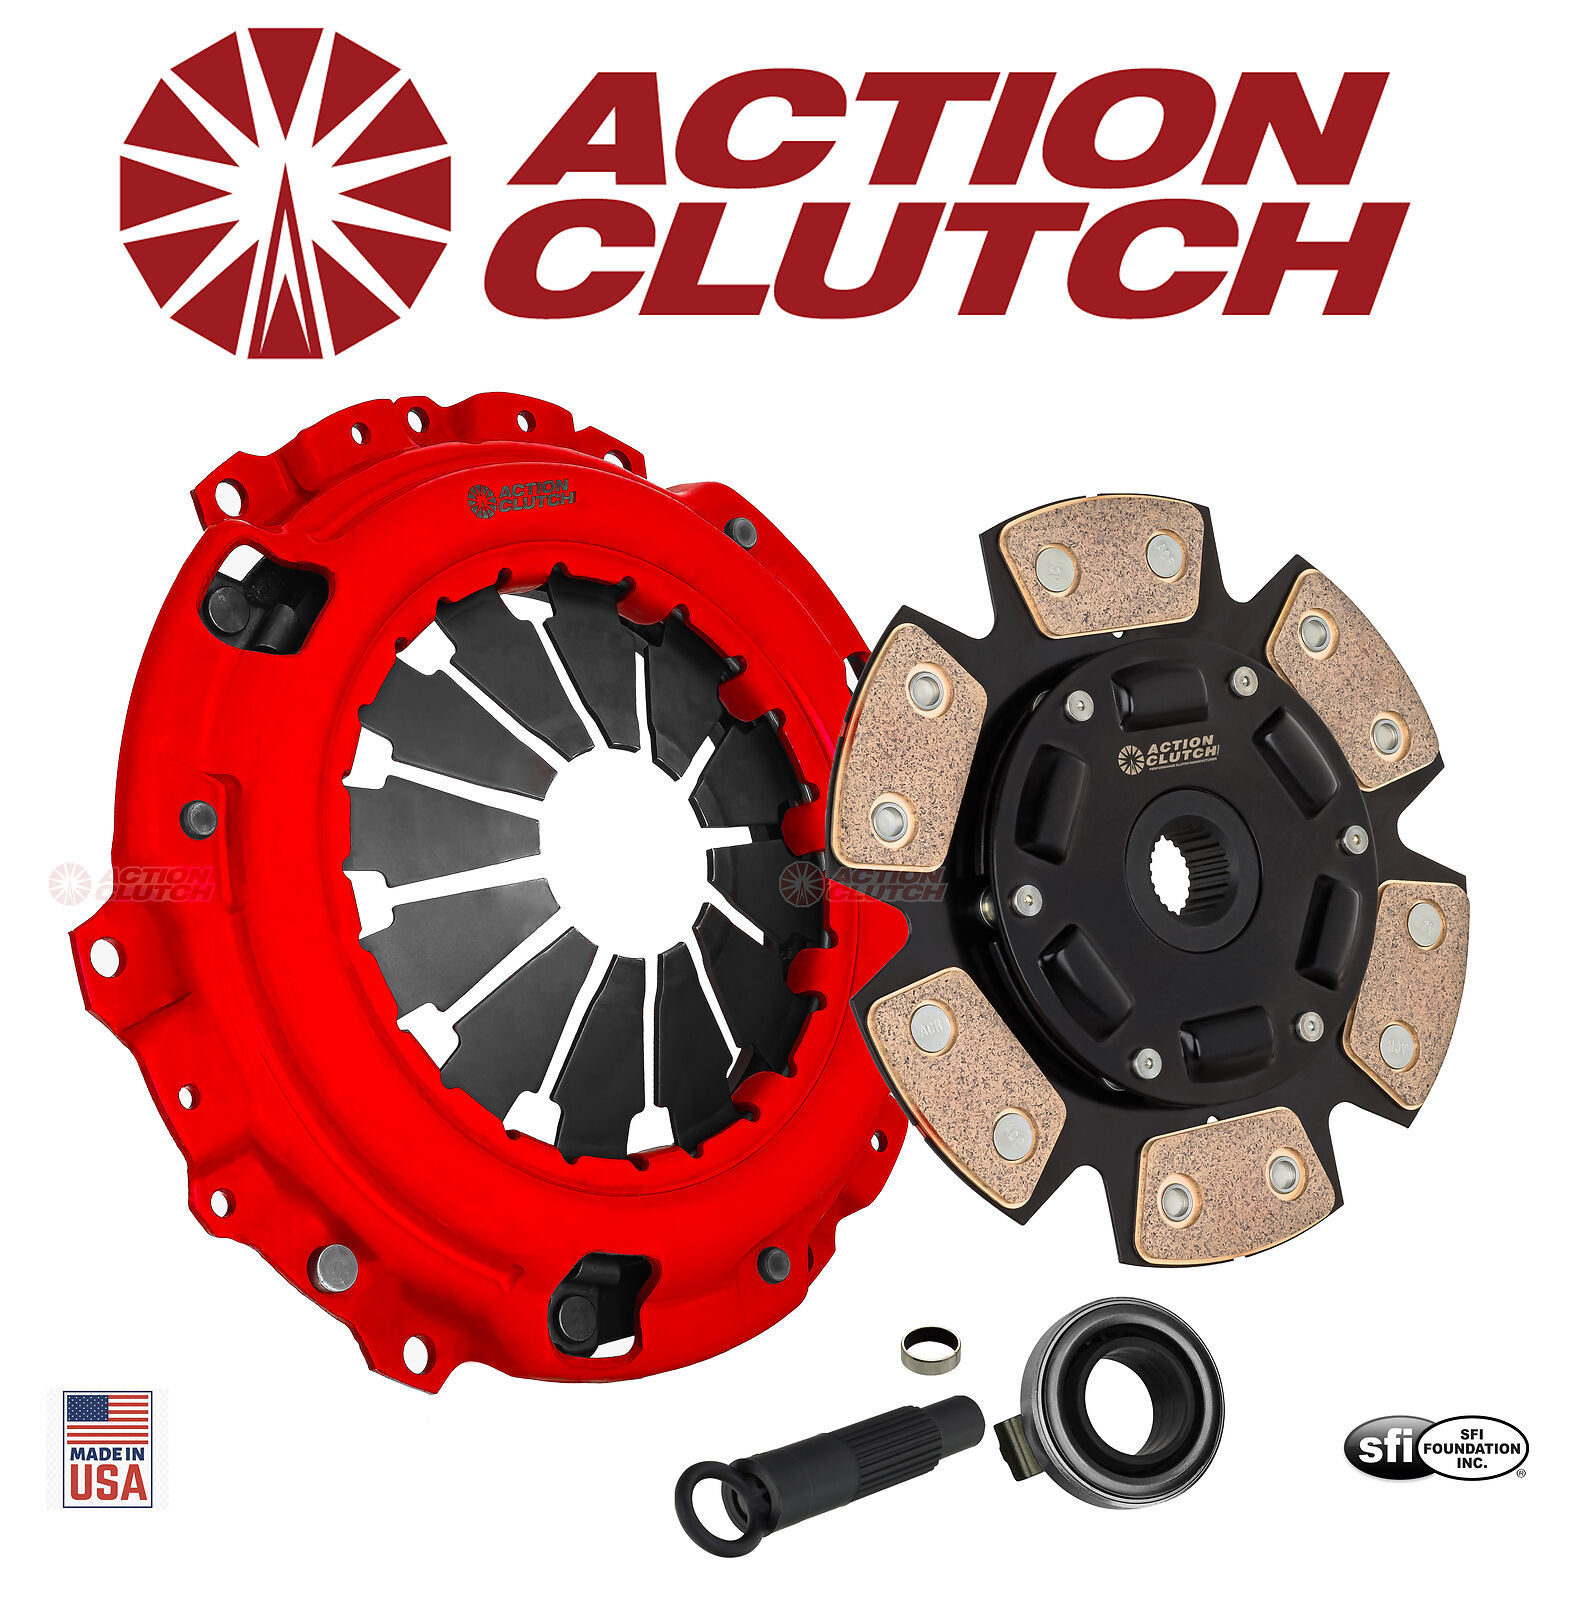 ACTION CLUTCH STAGE 3 CLUTCH KIT FITS ALL HONDA ACURA K SERIES